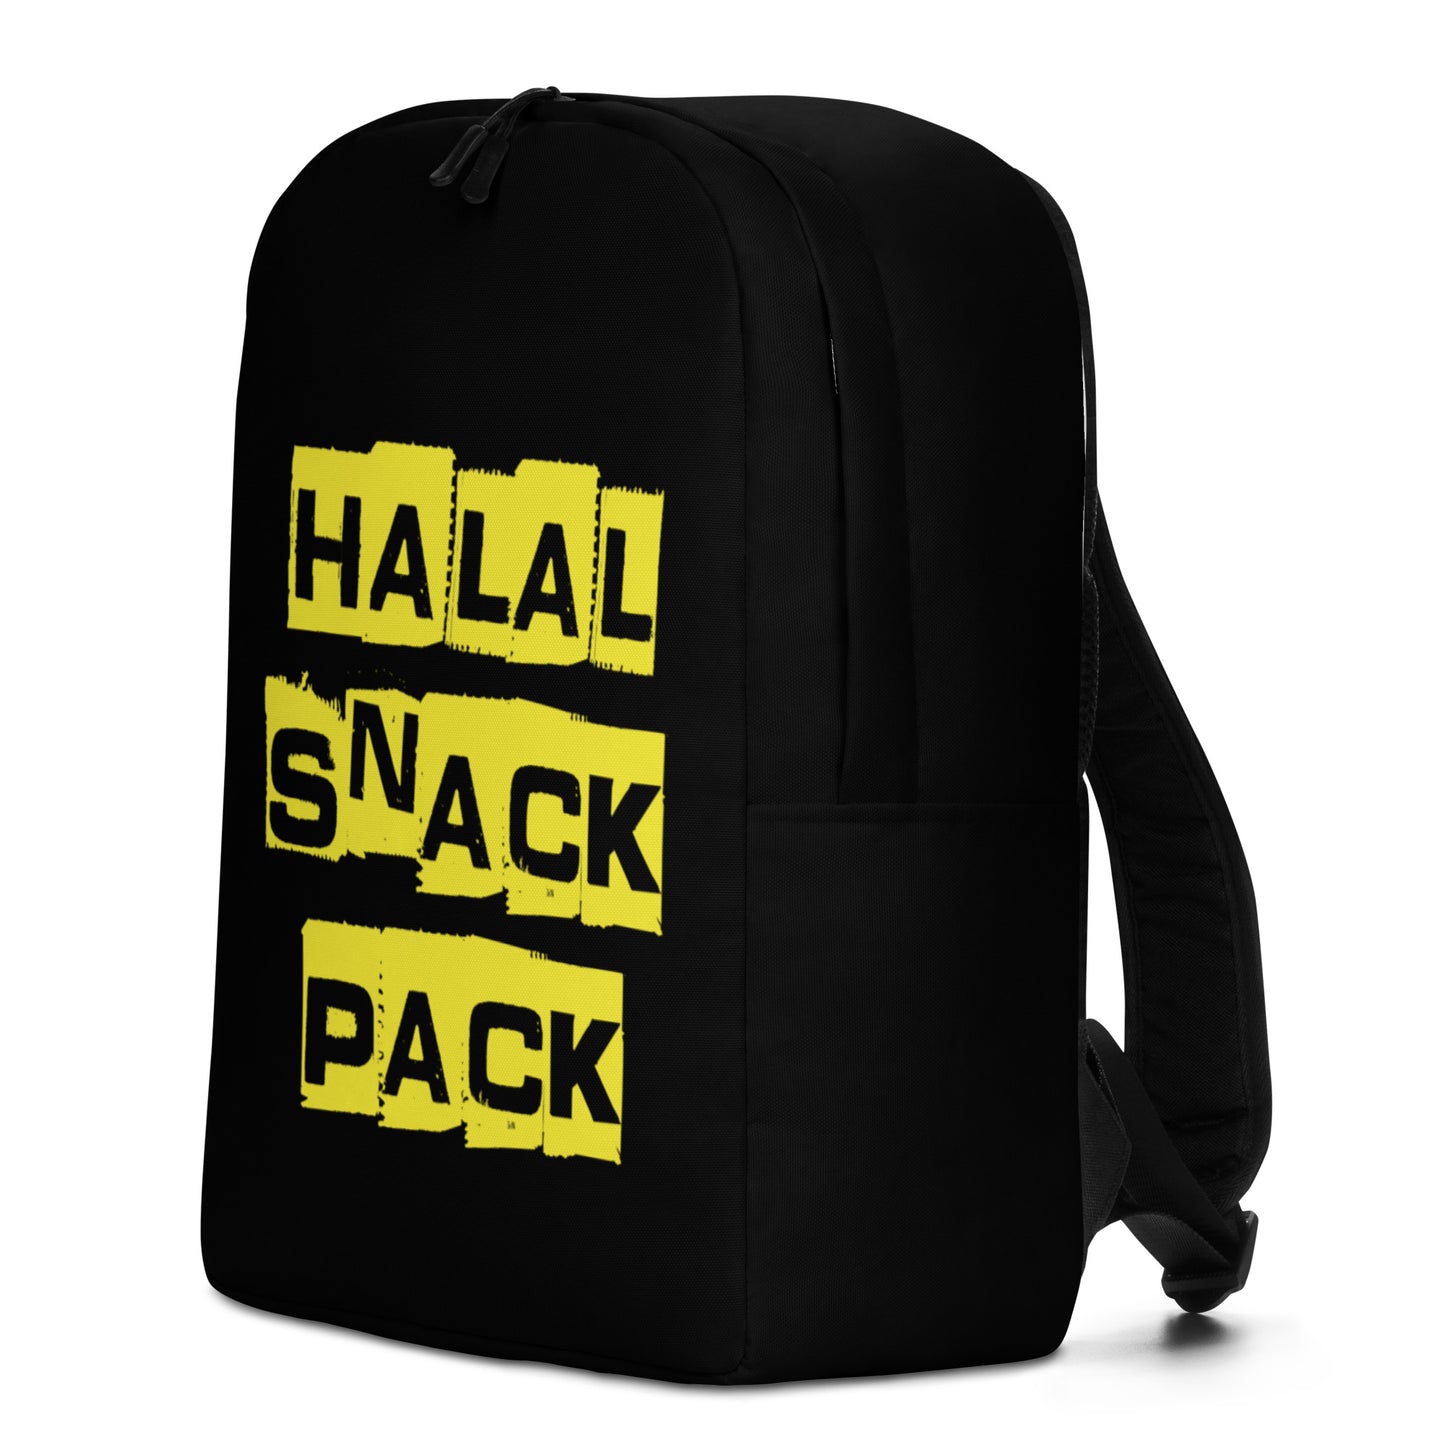 Halal Snack Pack - Sustainably Made Backpack